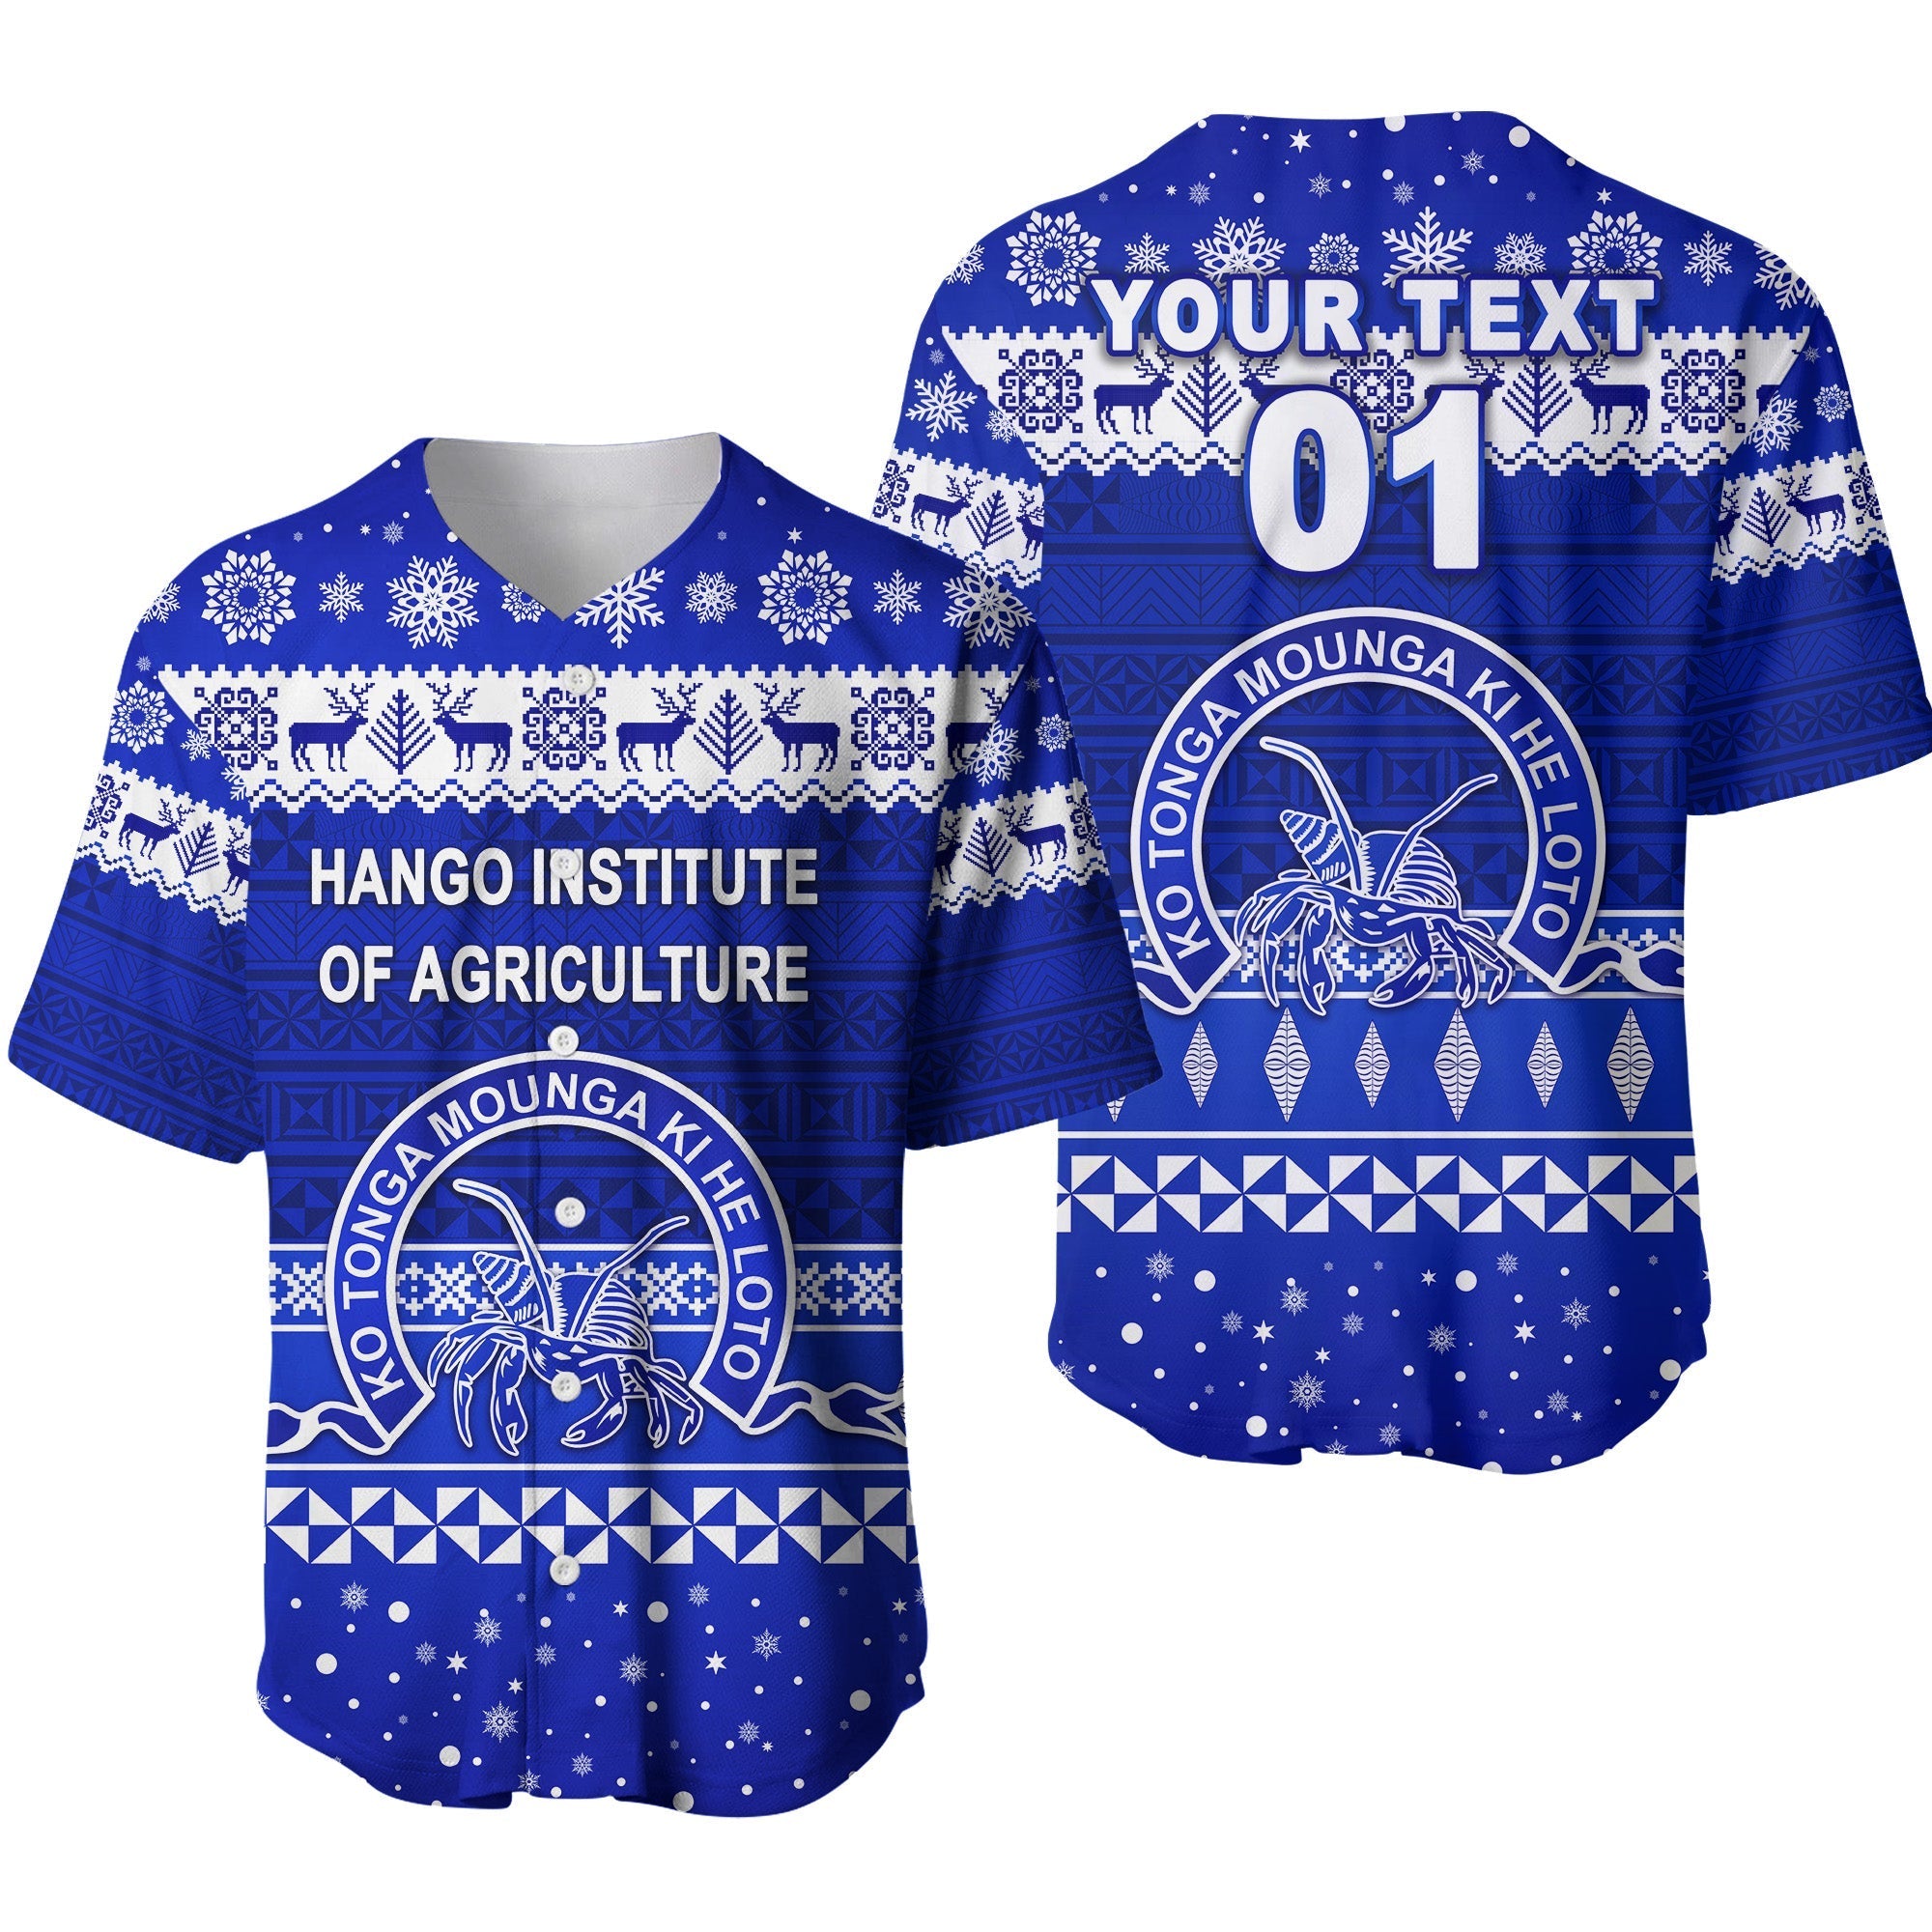 custom-personalised-hango-institute-of-agriculture-christmas-baseball-jersey-simple-style